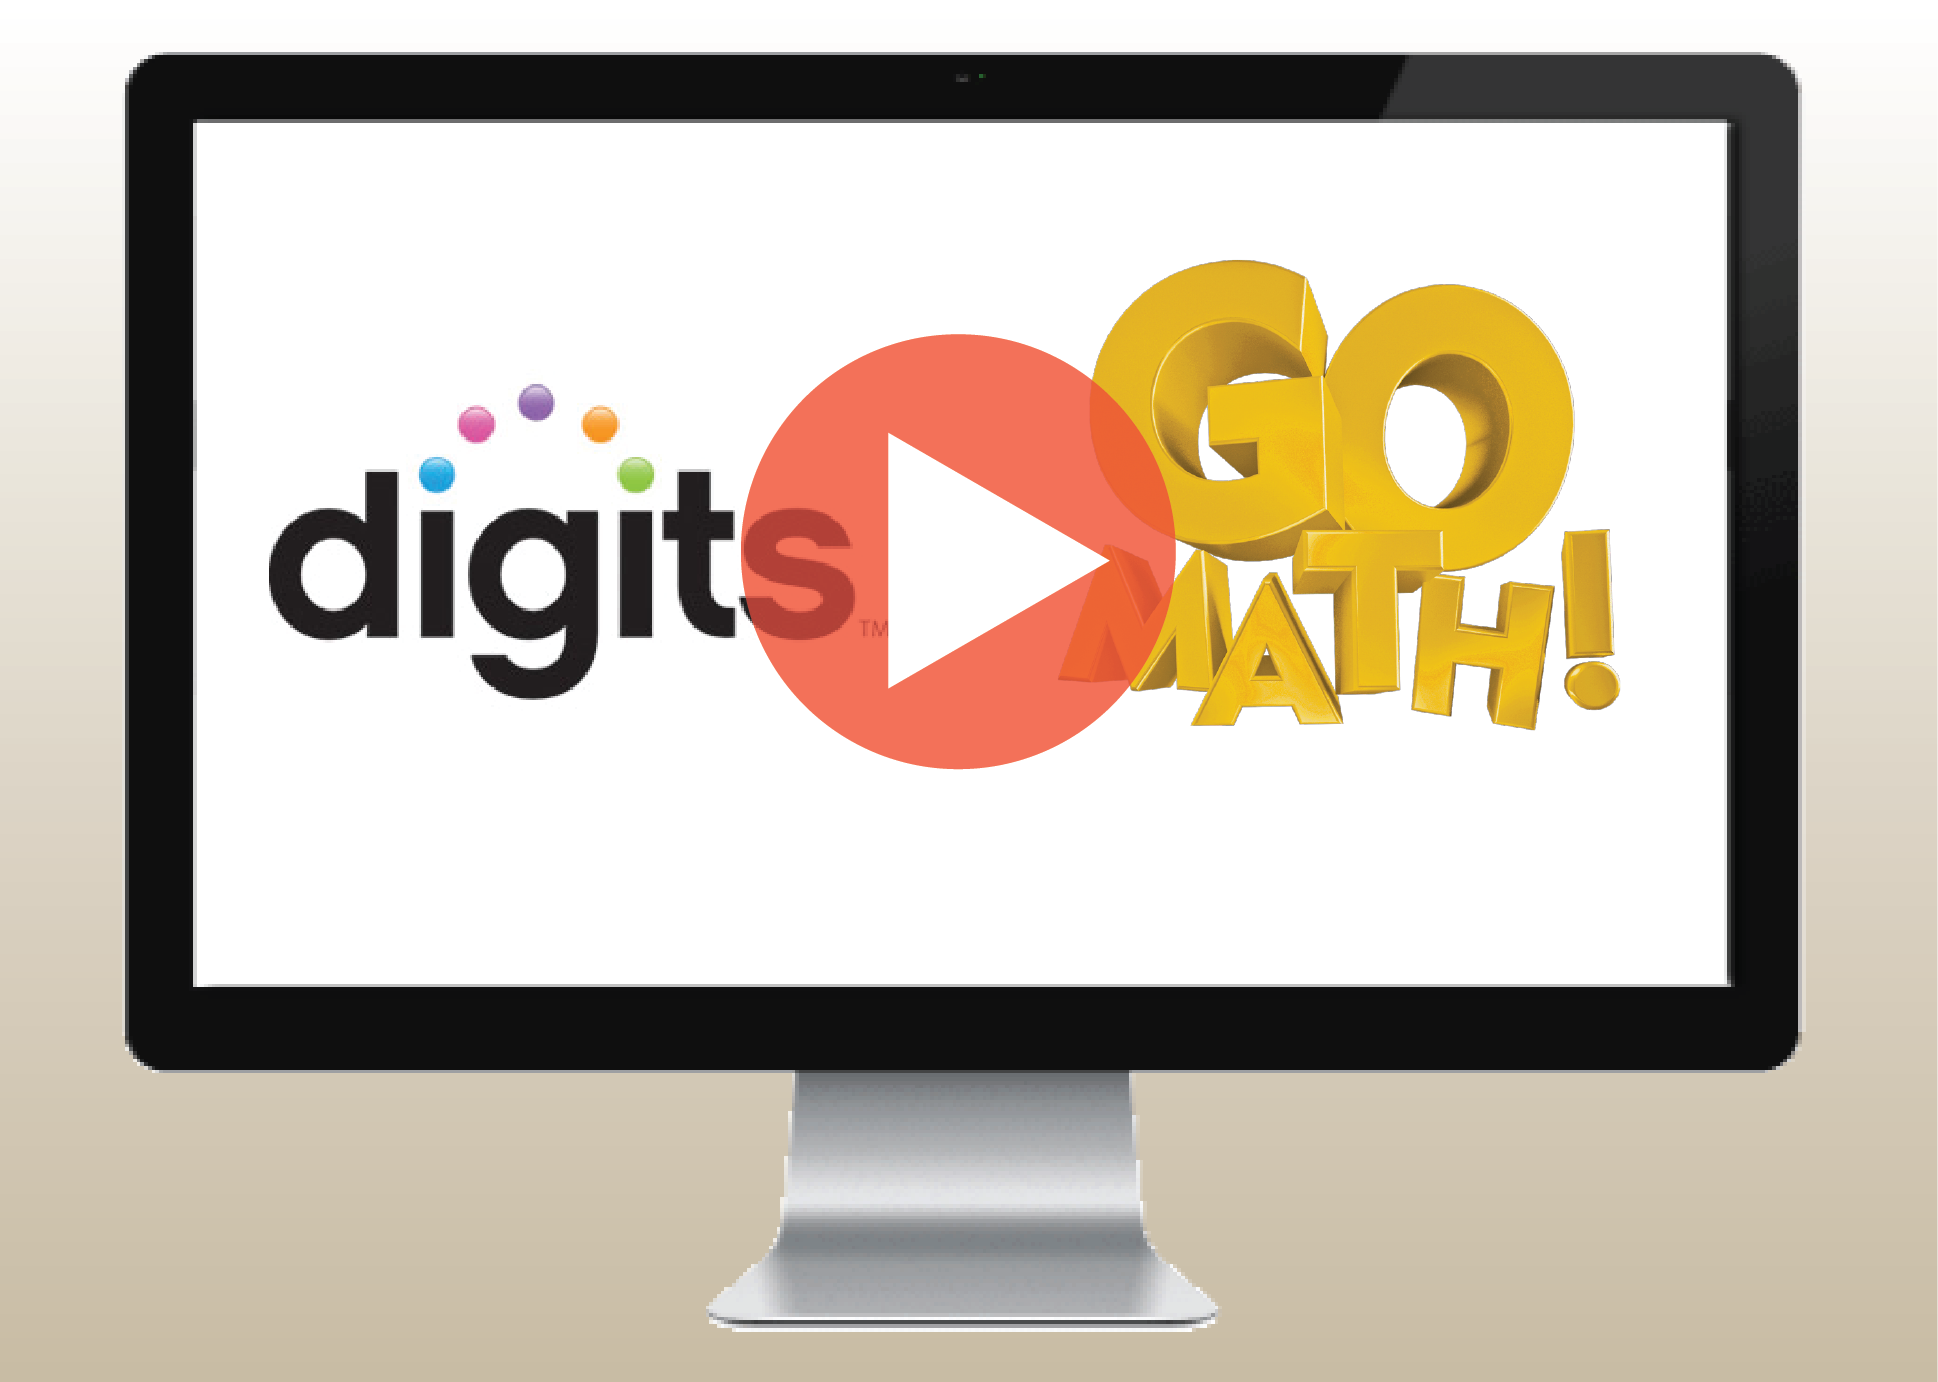 Video tutorials for Digits and Go Math! online programs